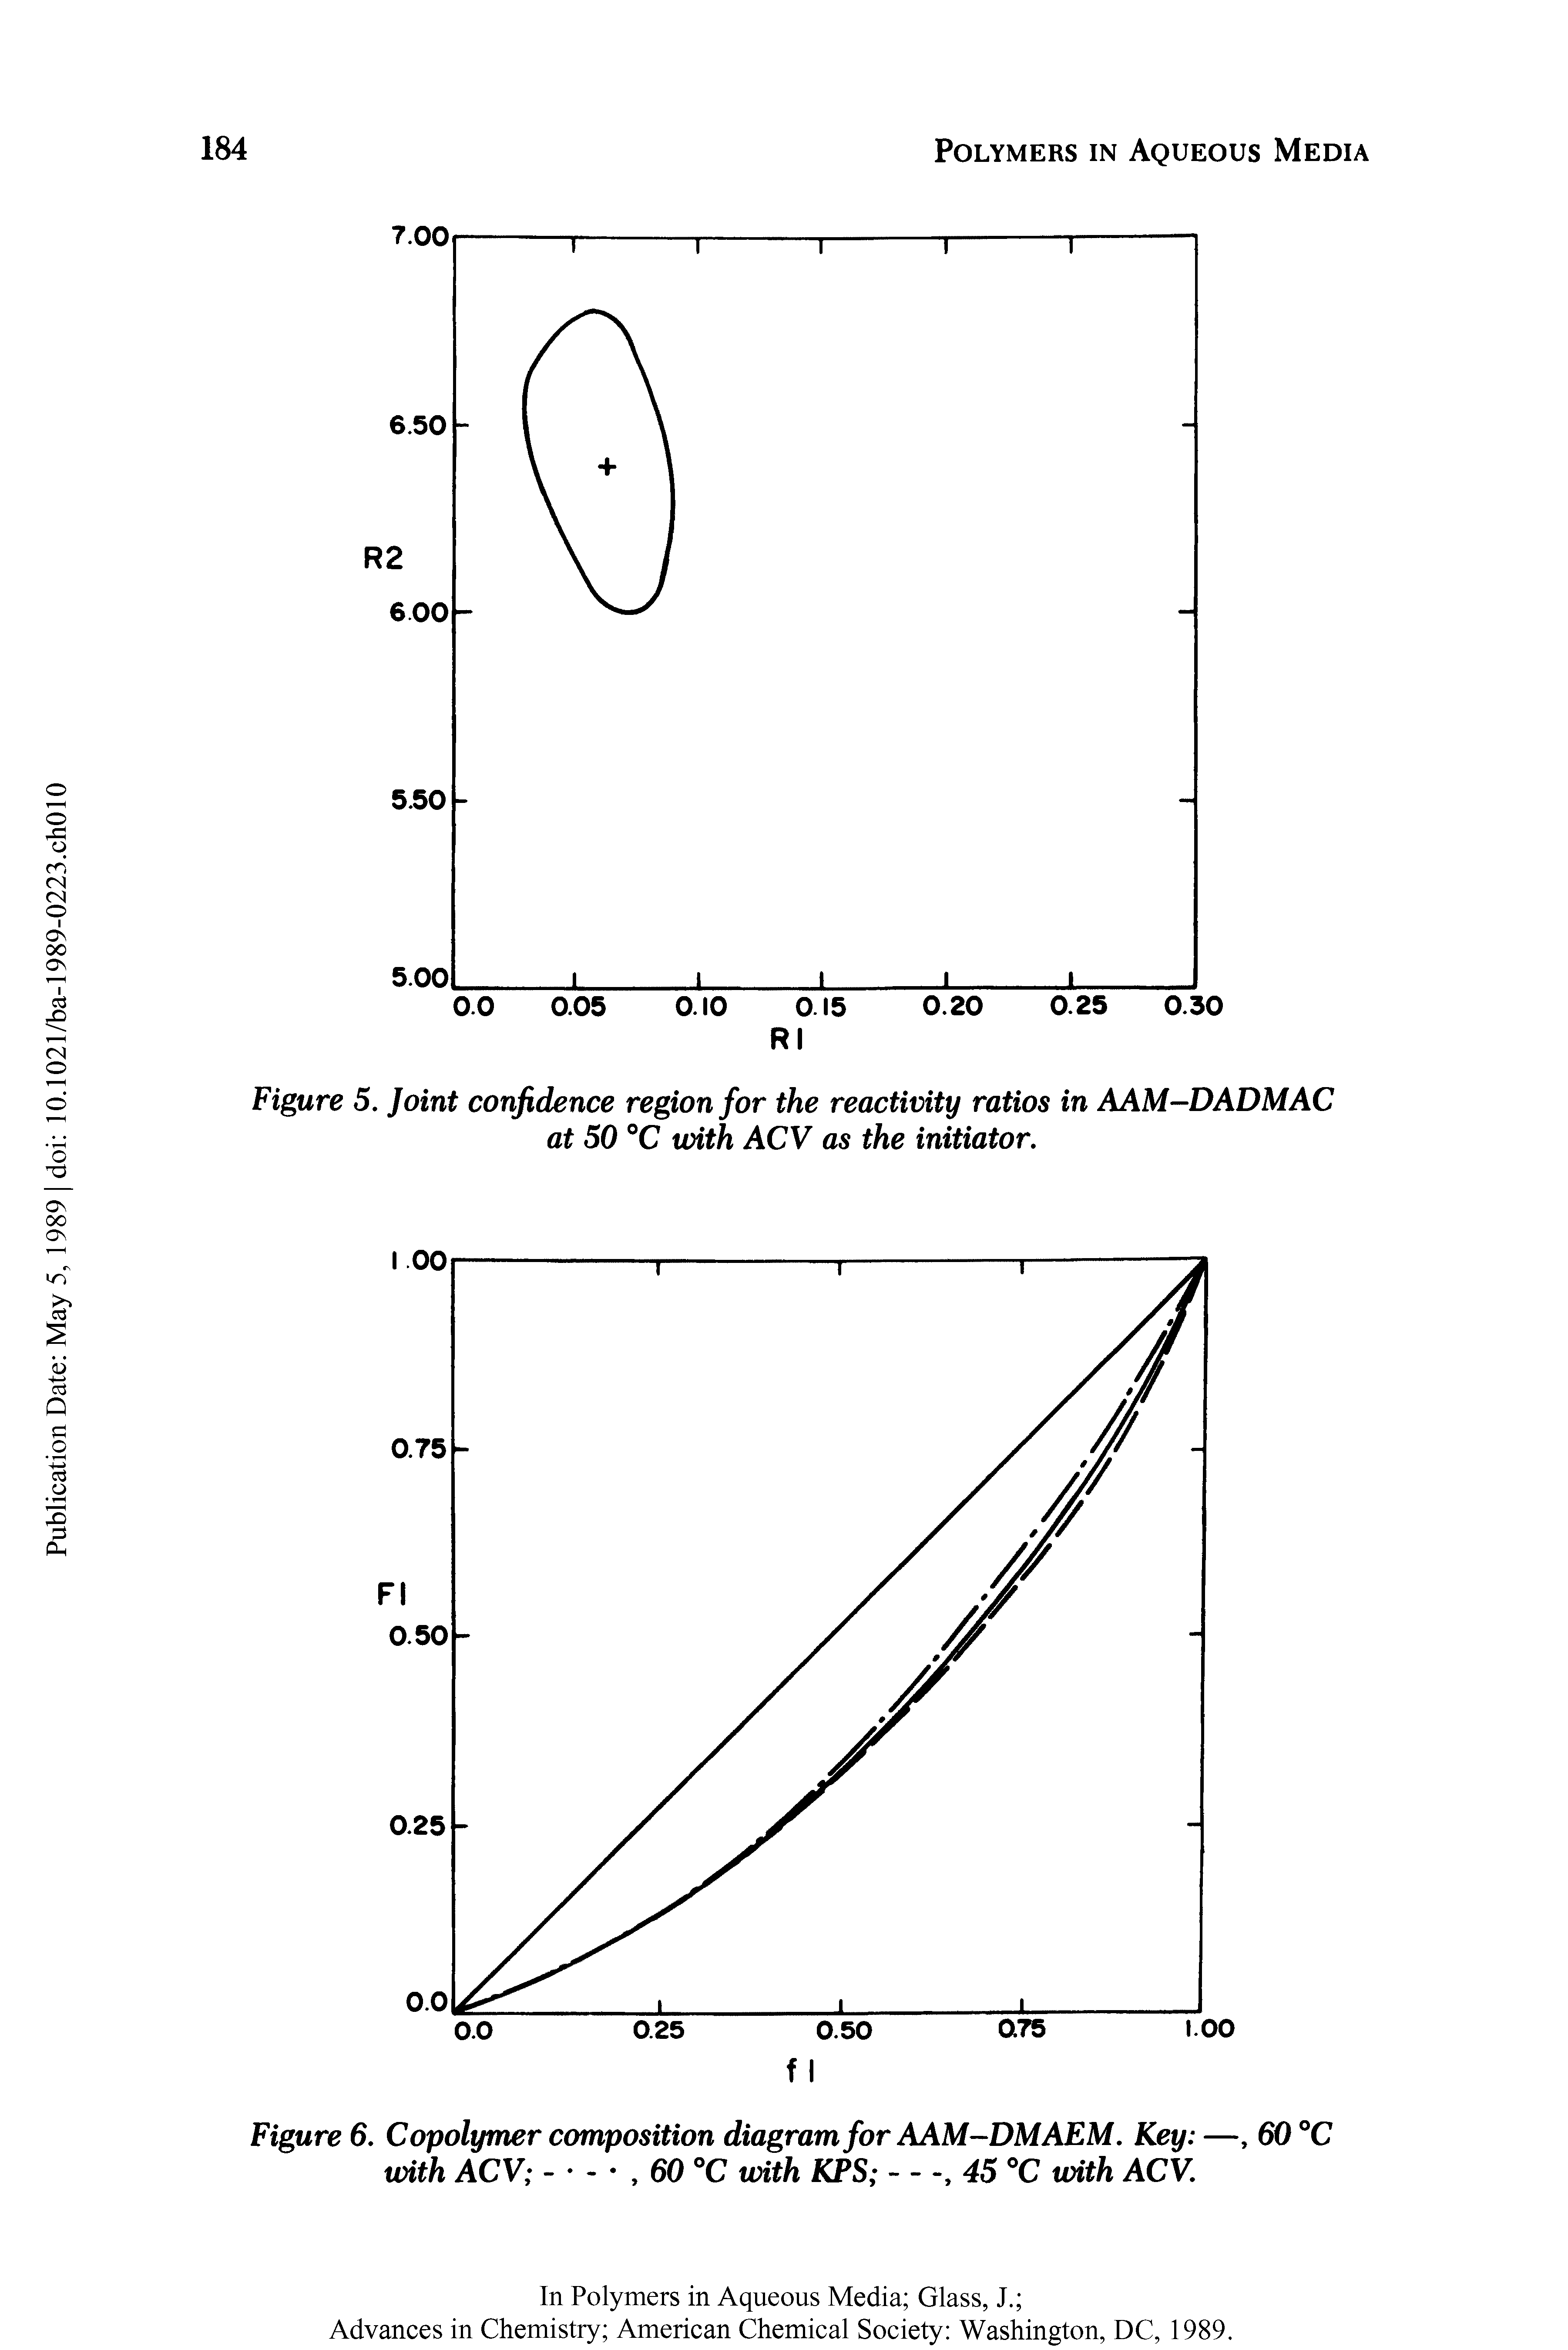 Figure 6. Copolymer composition diagram for AAM-DMAEM. Key —, 60 °C with ACV , 60 °C with KPS ---,45 with ACV.